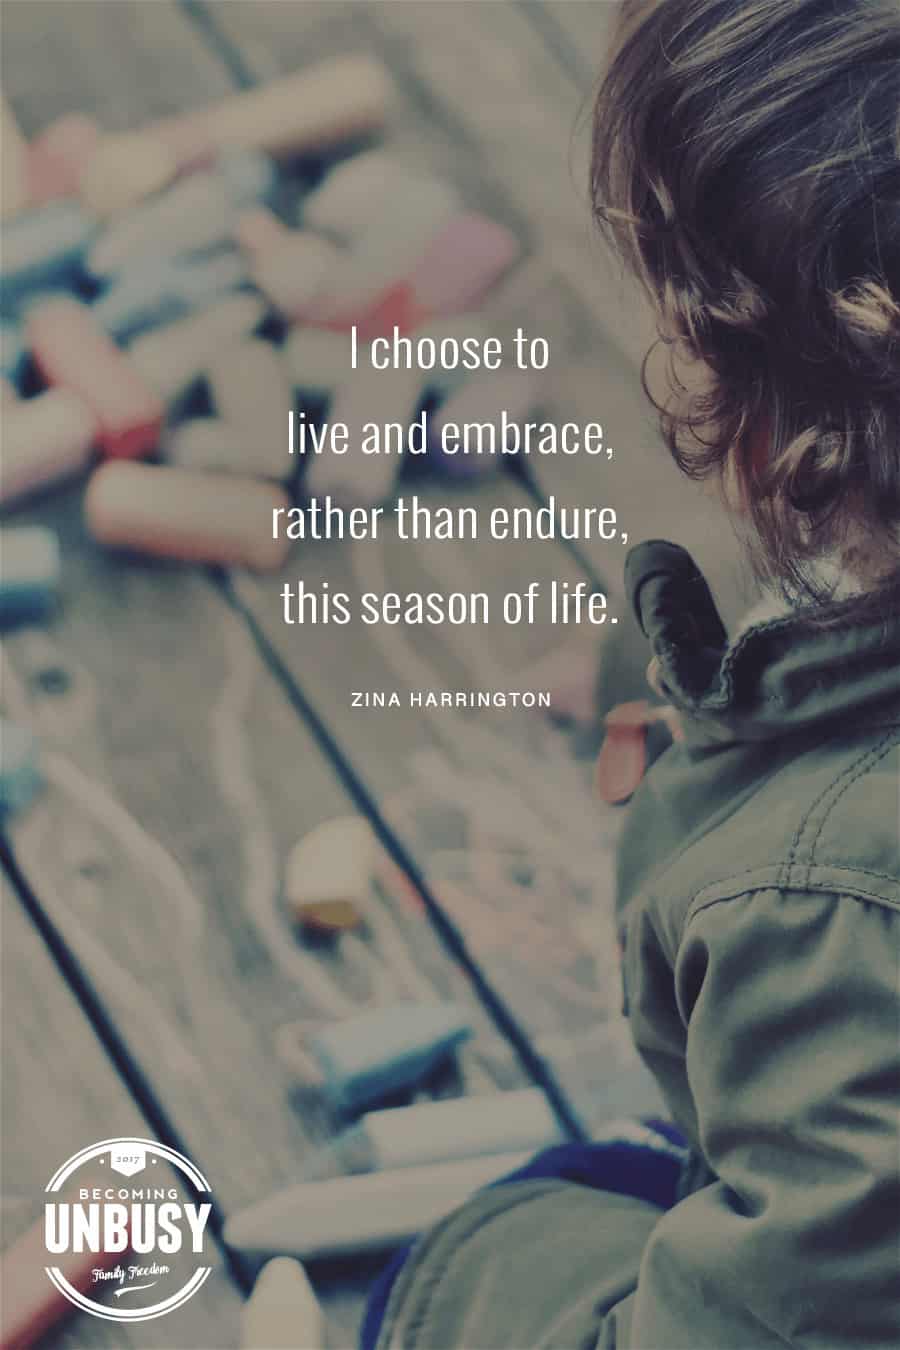 I choose to live and embrace, rather than endure, this season of life. #quote #motherhood *loving this parenting post